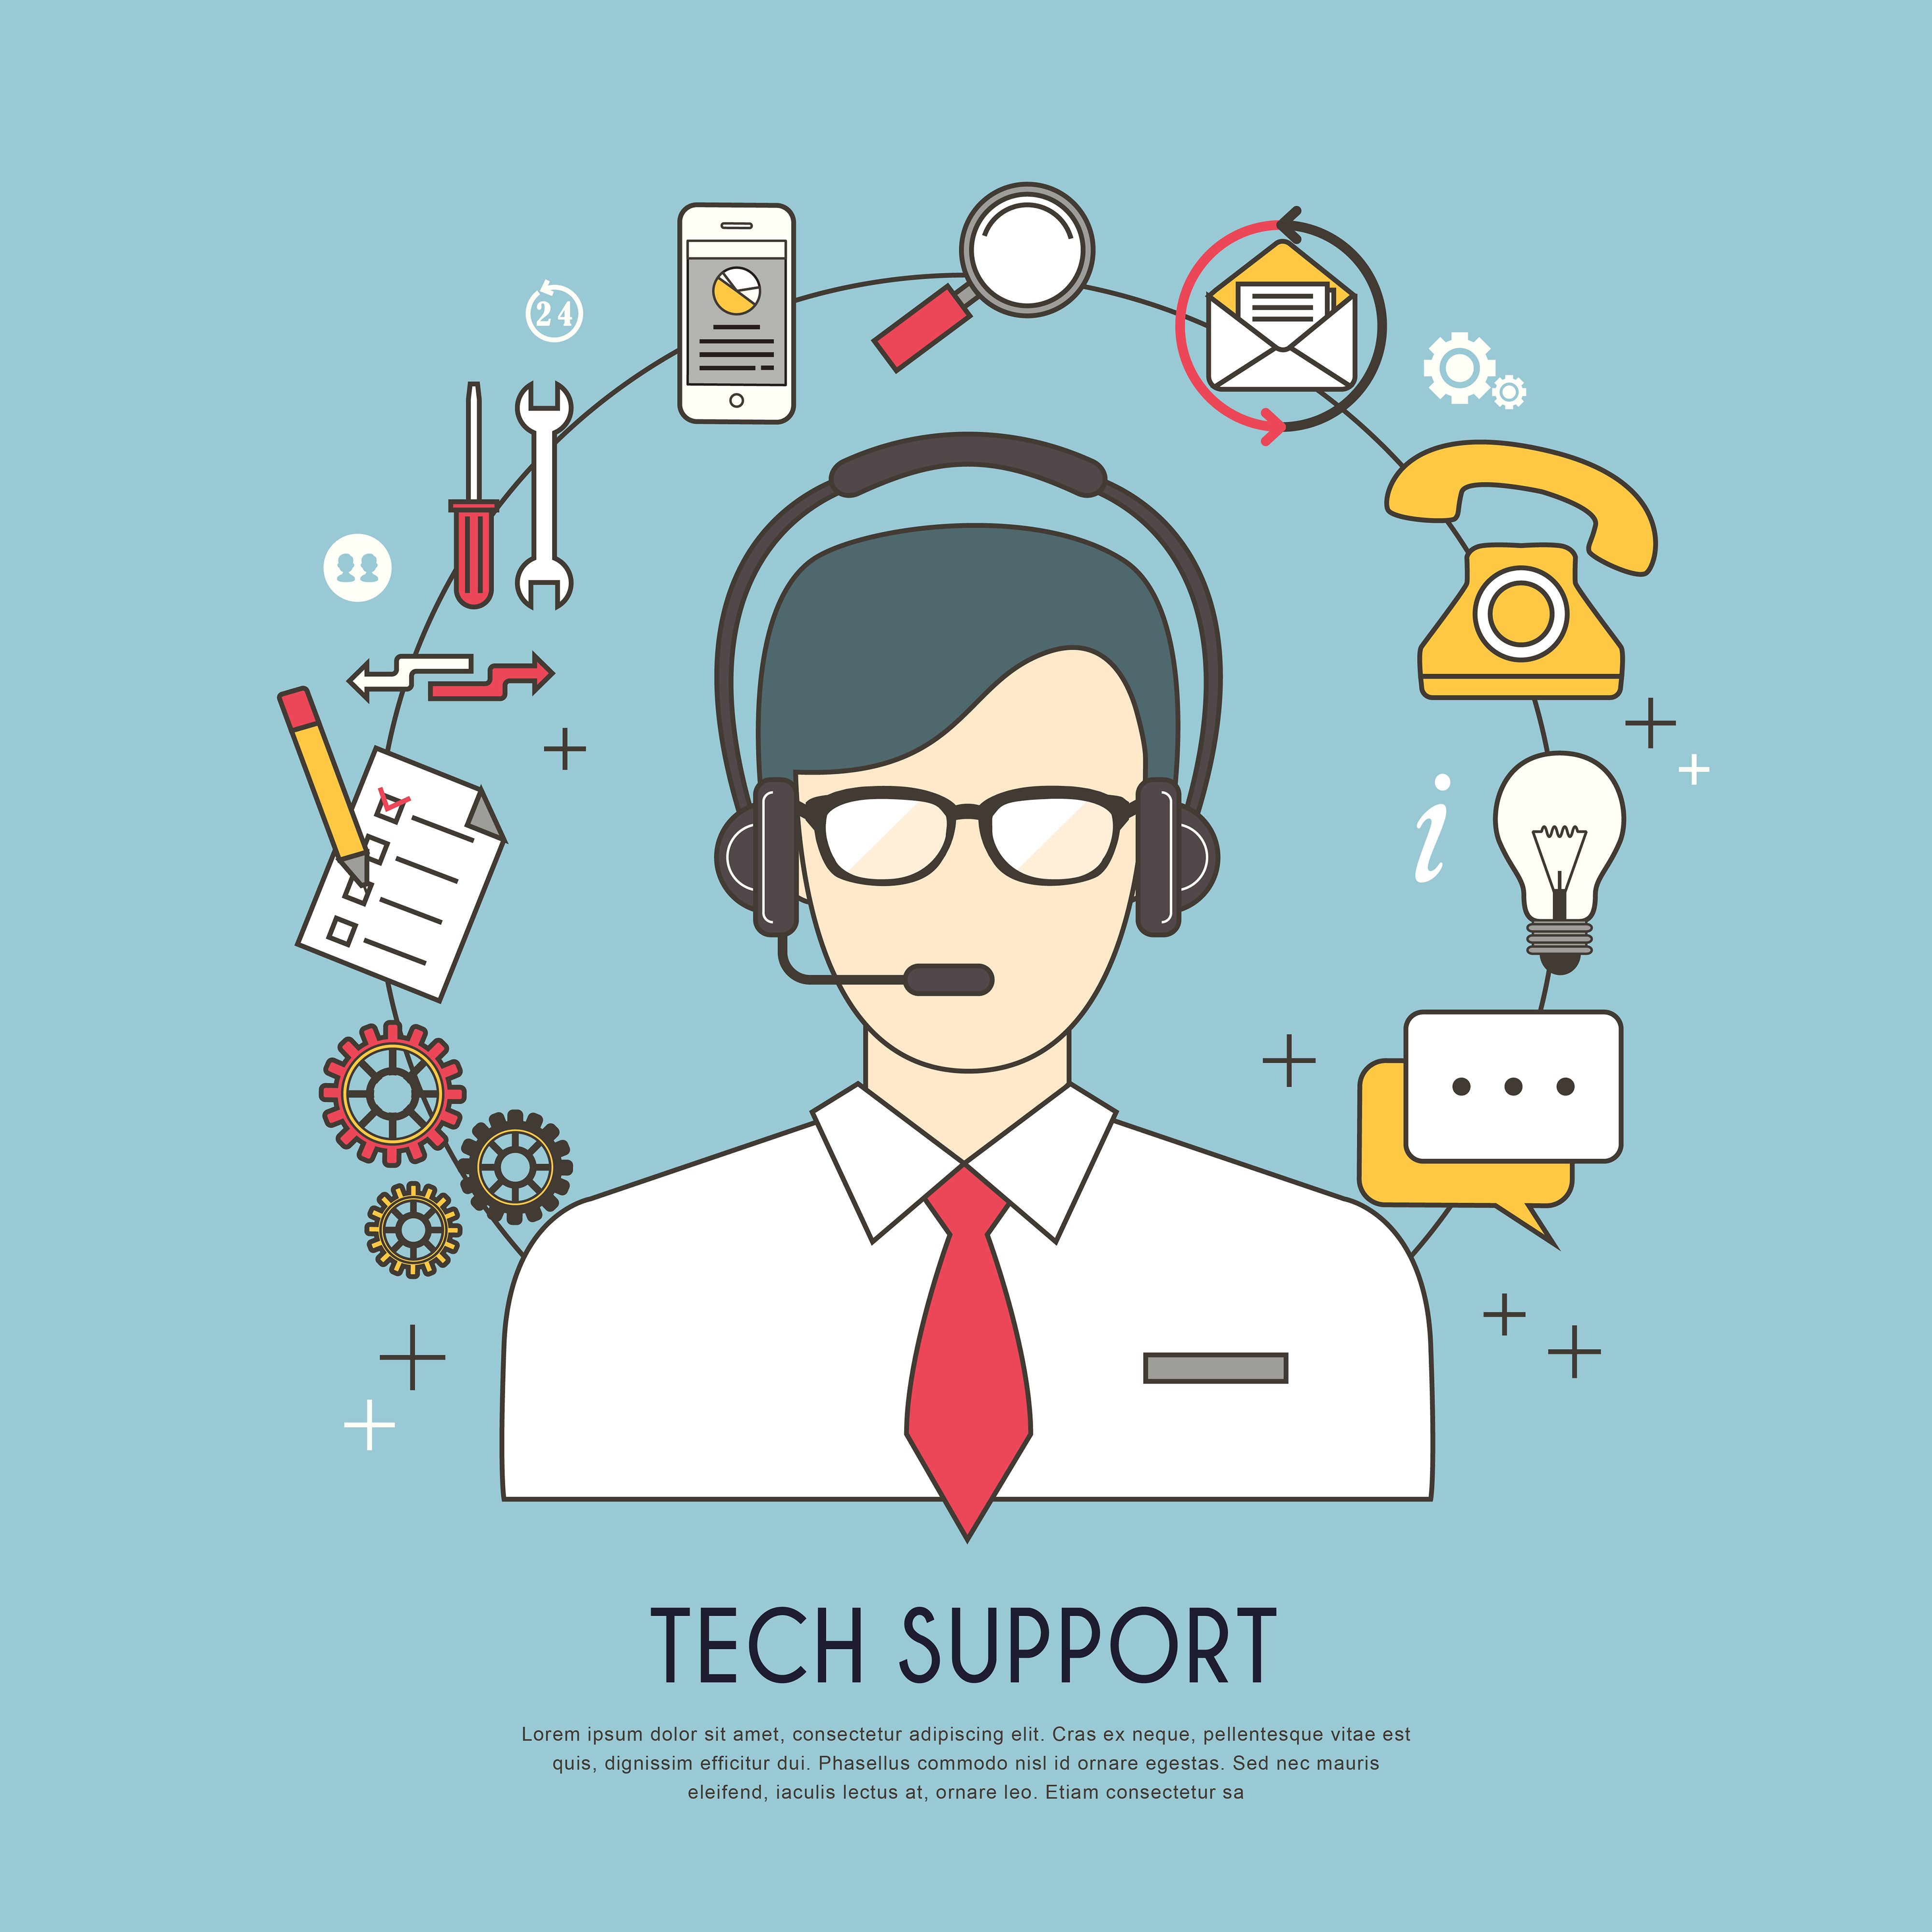 Image of tech support